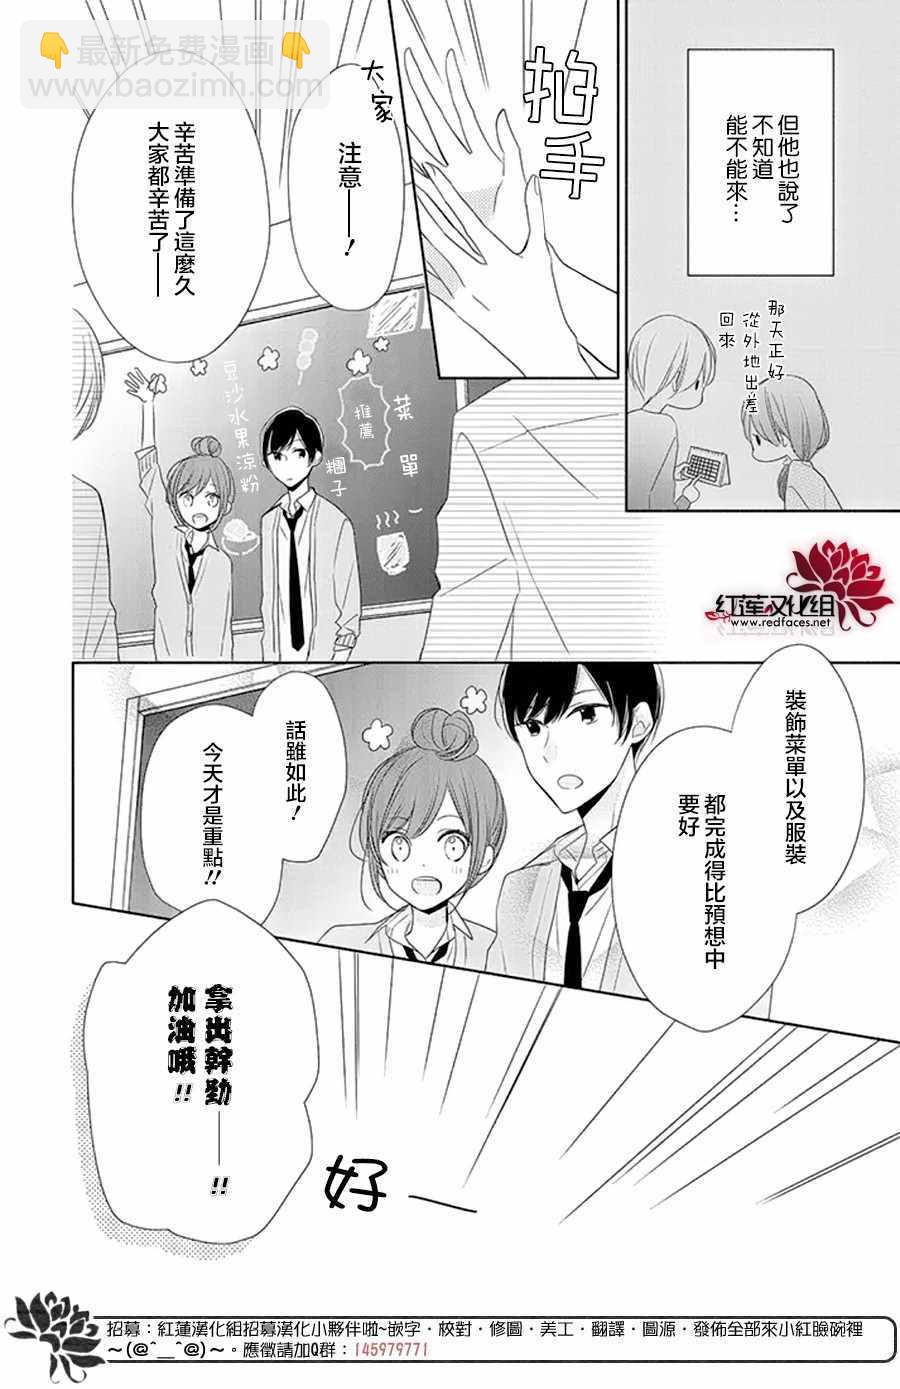 If given a second chance - 16話 - 4